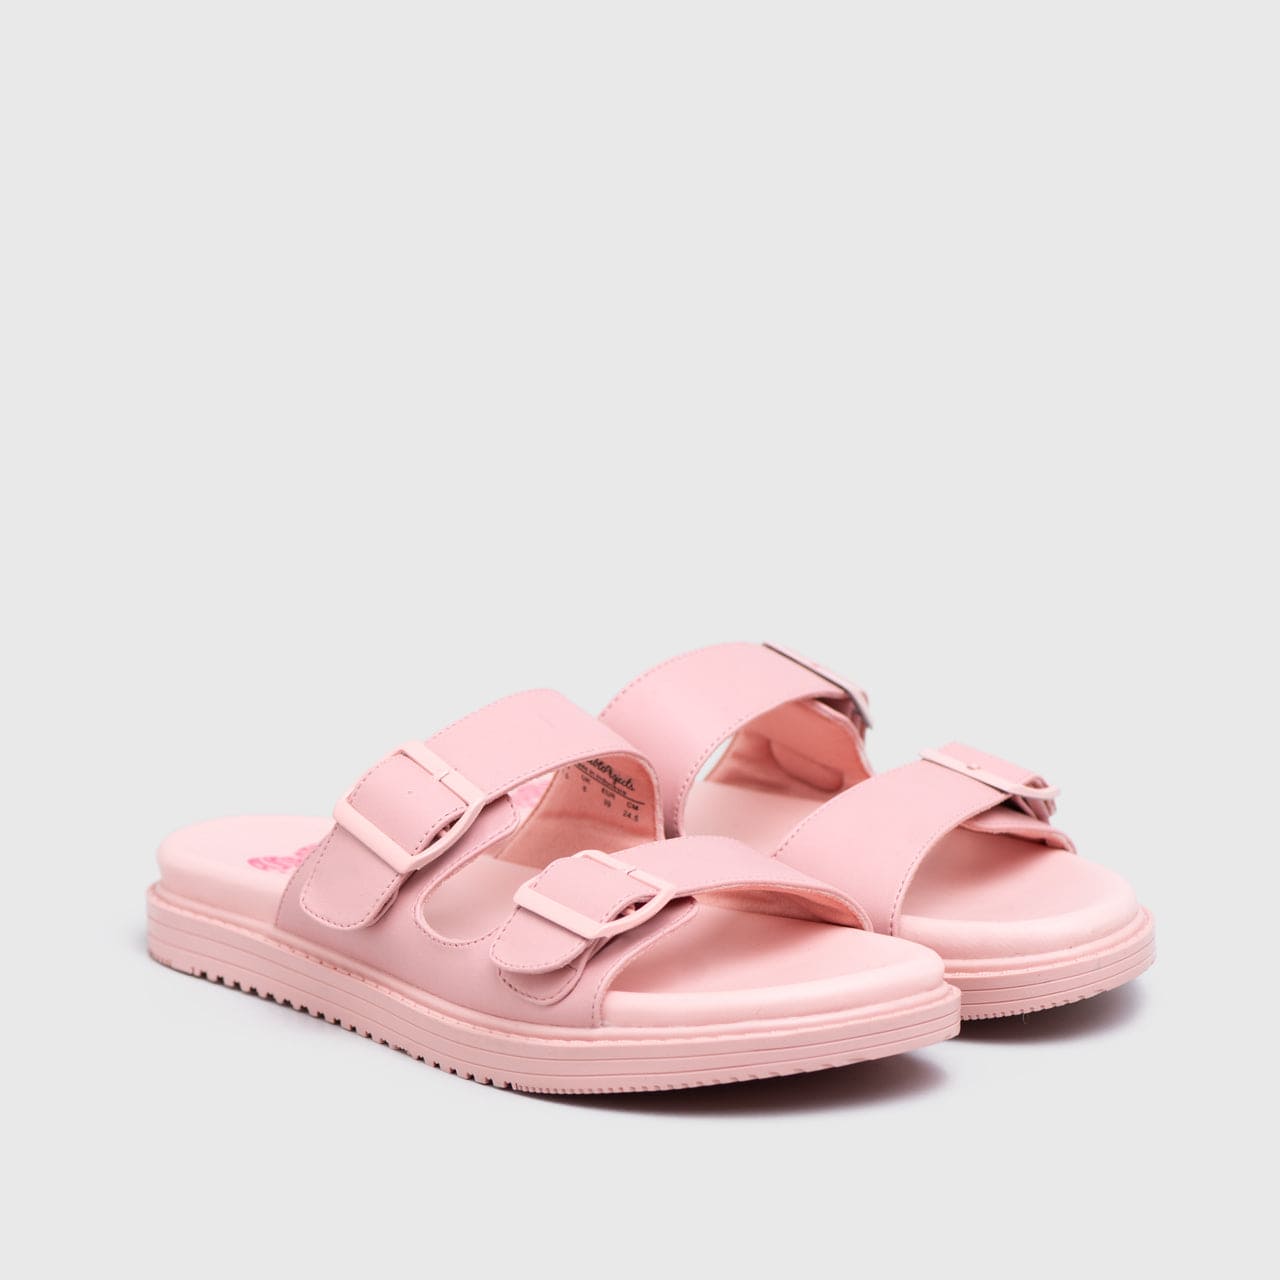 Adorable Projects Official 41 Adorableprojects - Claritaya Sandals Pink - Sendal Wanita